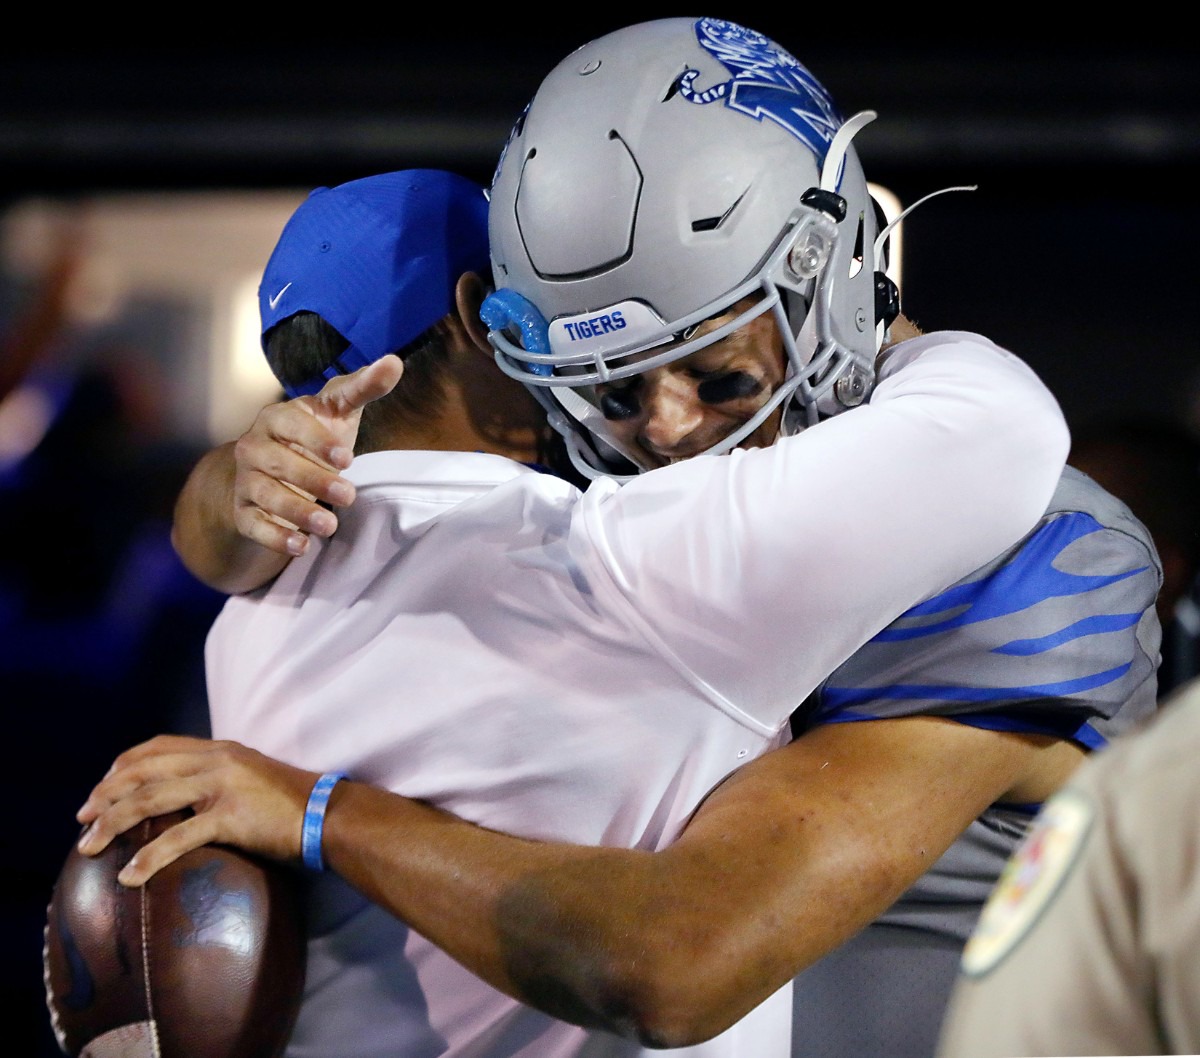 <strong>University of Memphis quarterback Brady White (3) embraces head coach Ryan Silverfield while holding the game ball after an Oct. 17, 2020 game against University of Central Florida at Liberty Bowl Memorial Stadium.</strong> (Patrick Lantrip/Daily Memphian)